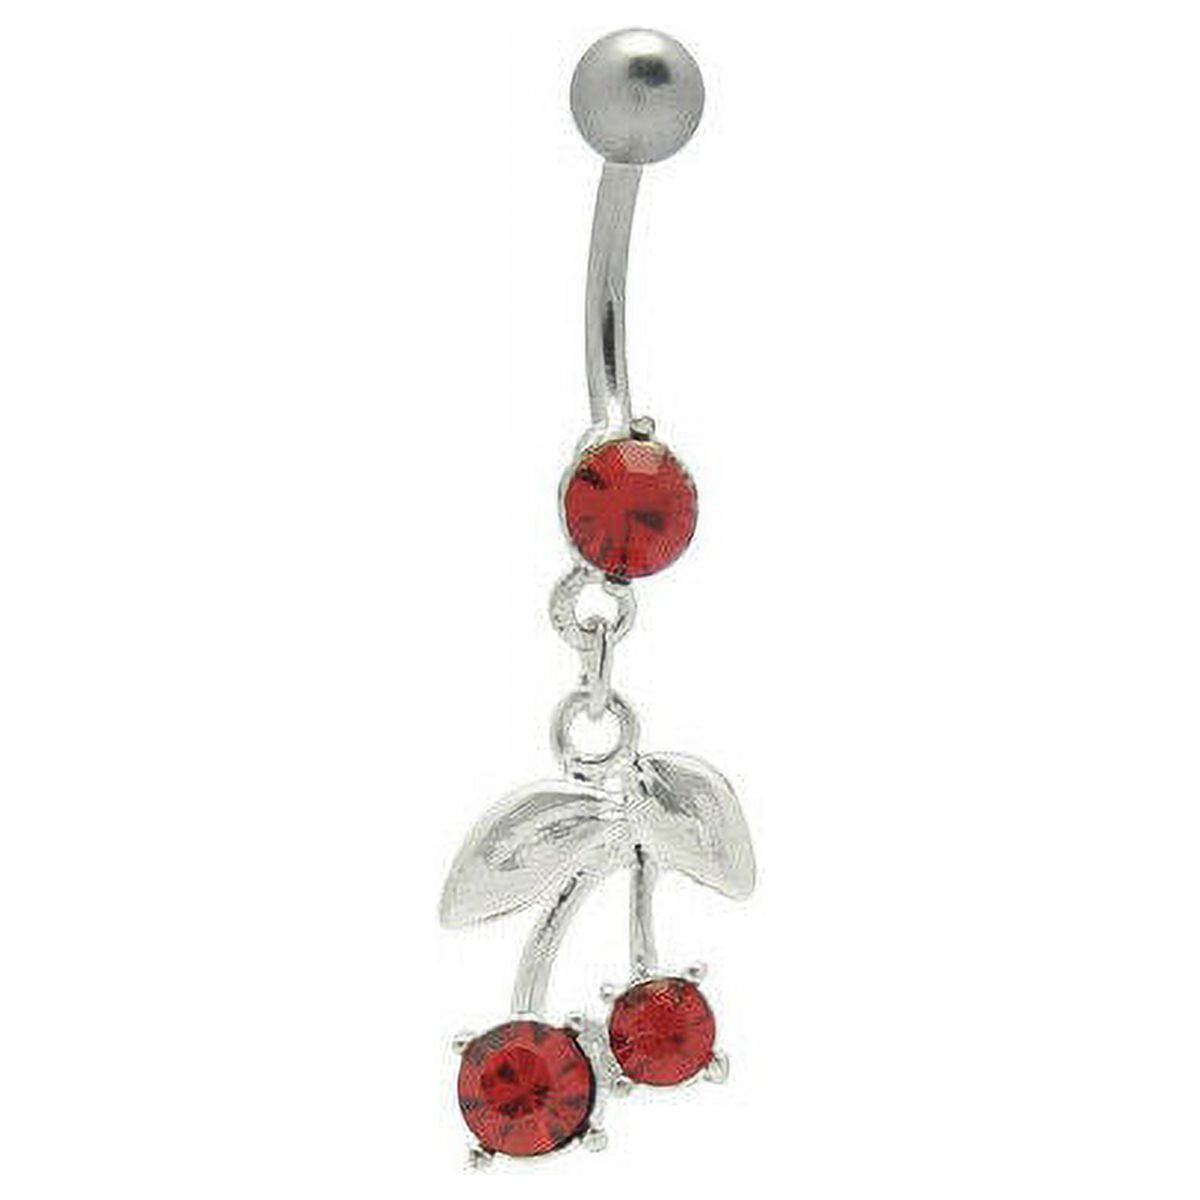 Red Double Gem Ball Steel Belly Button Ring - Rebel Bod